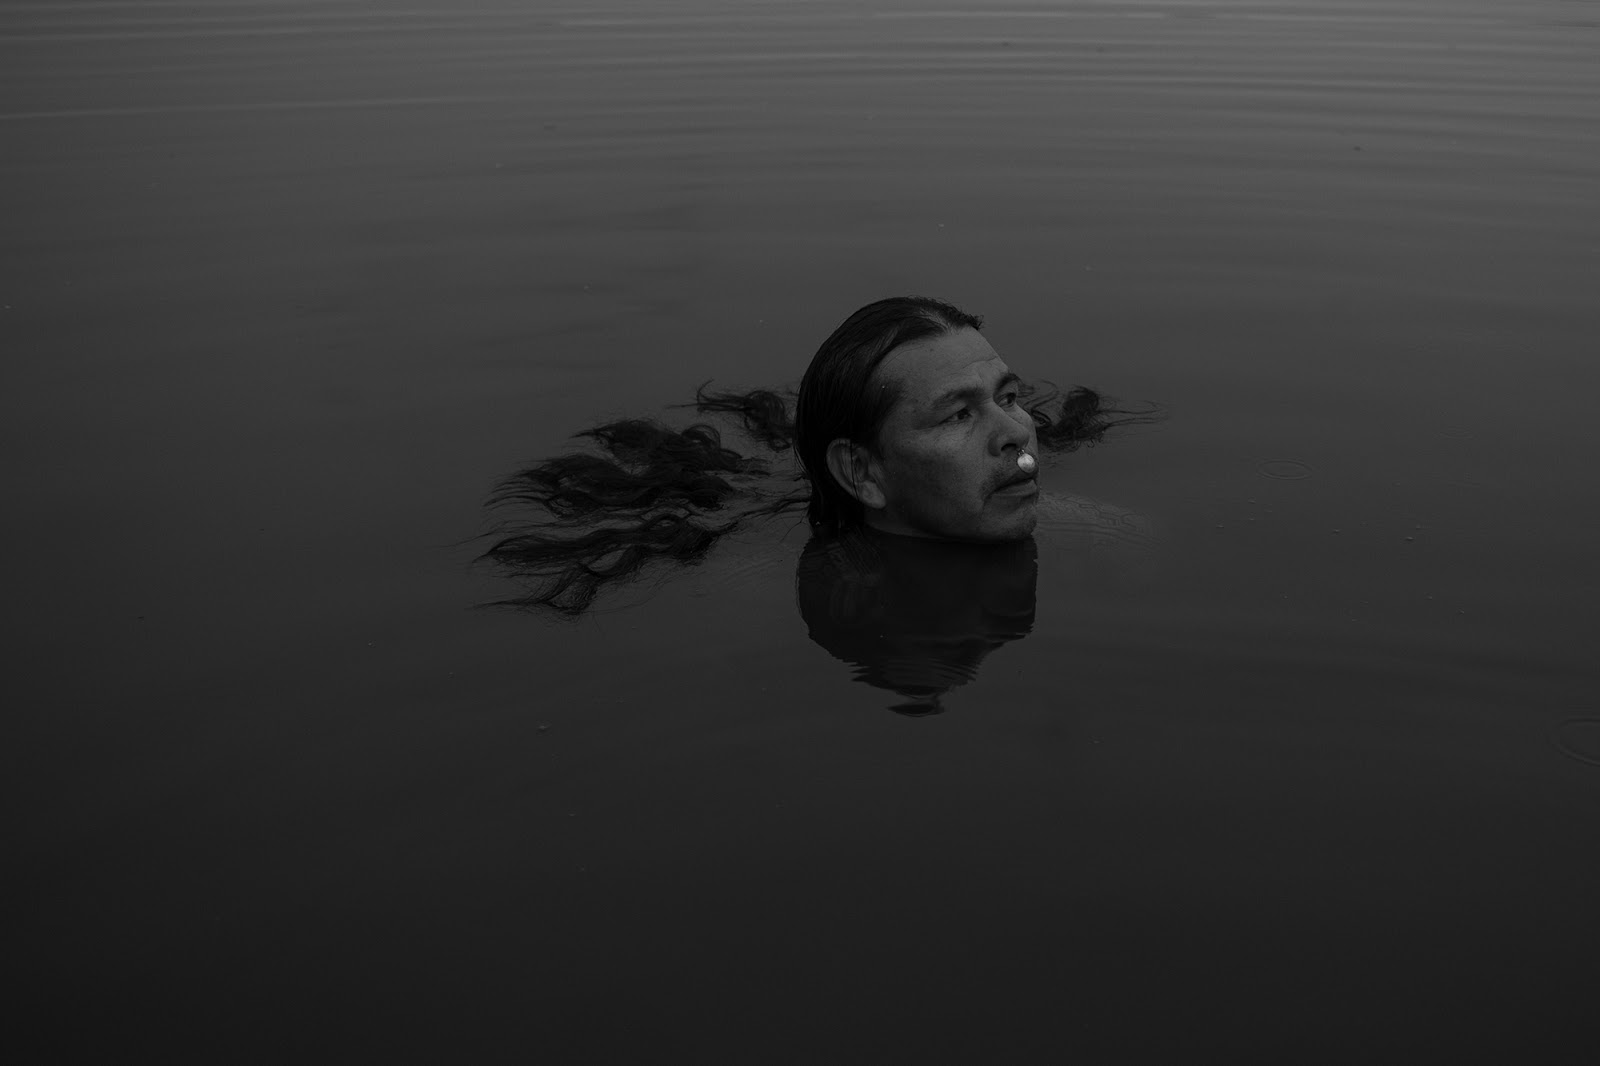 A man swimming with his head above the water.